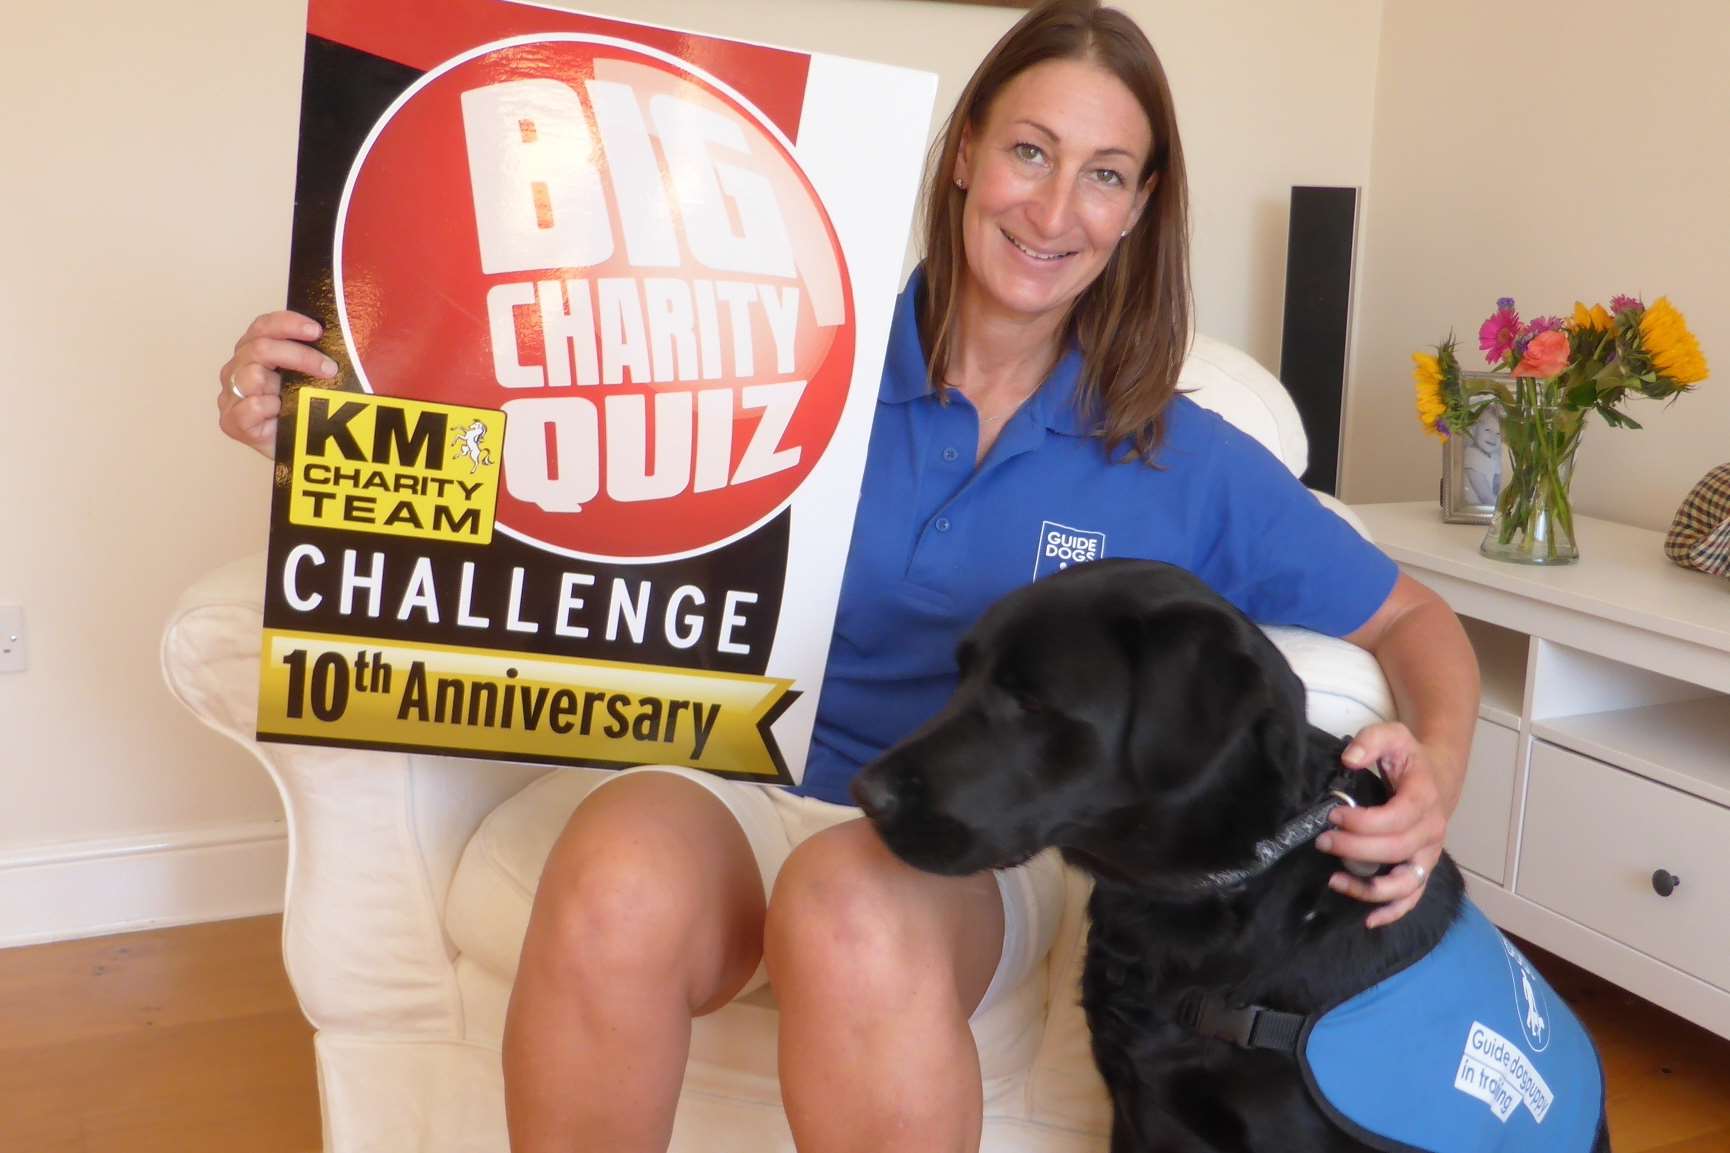 Susie New from Guide Dogs for the Blind pictured with Milo the dog urges teams to join in the Ashford Big Charity Quiz.